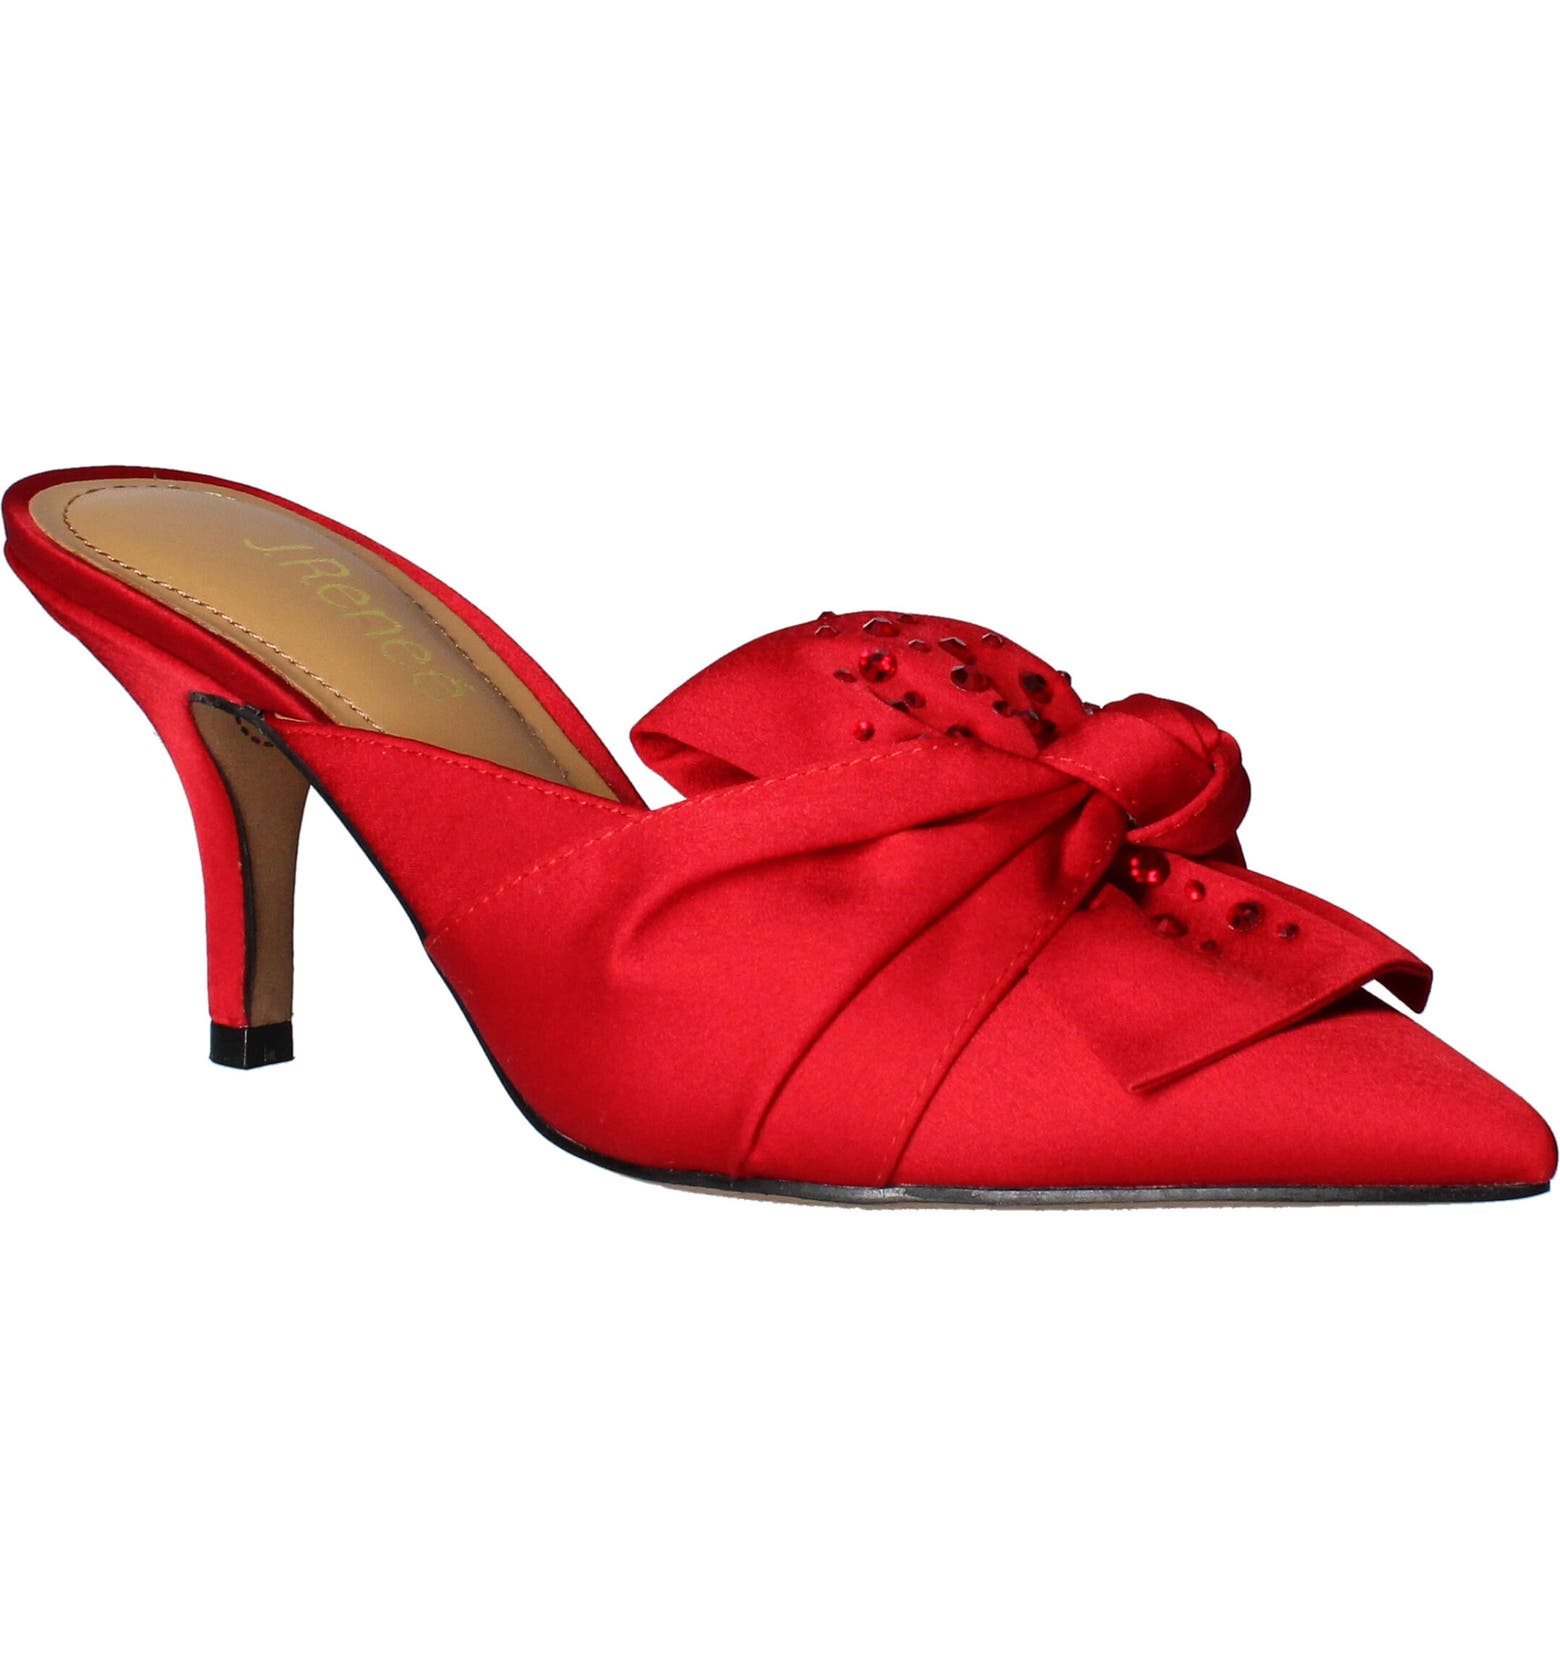 Red mules with heel and bow